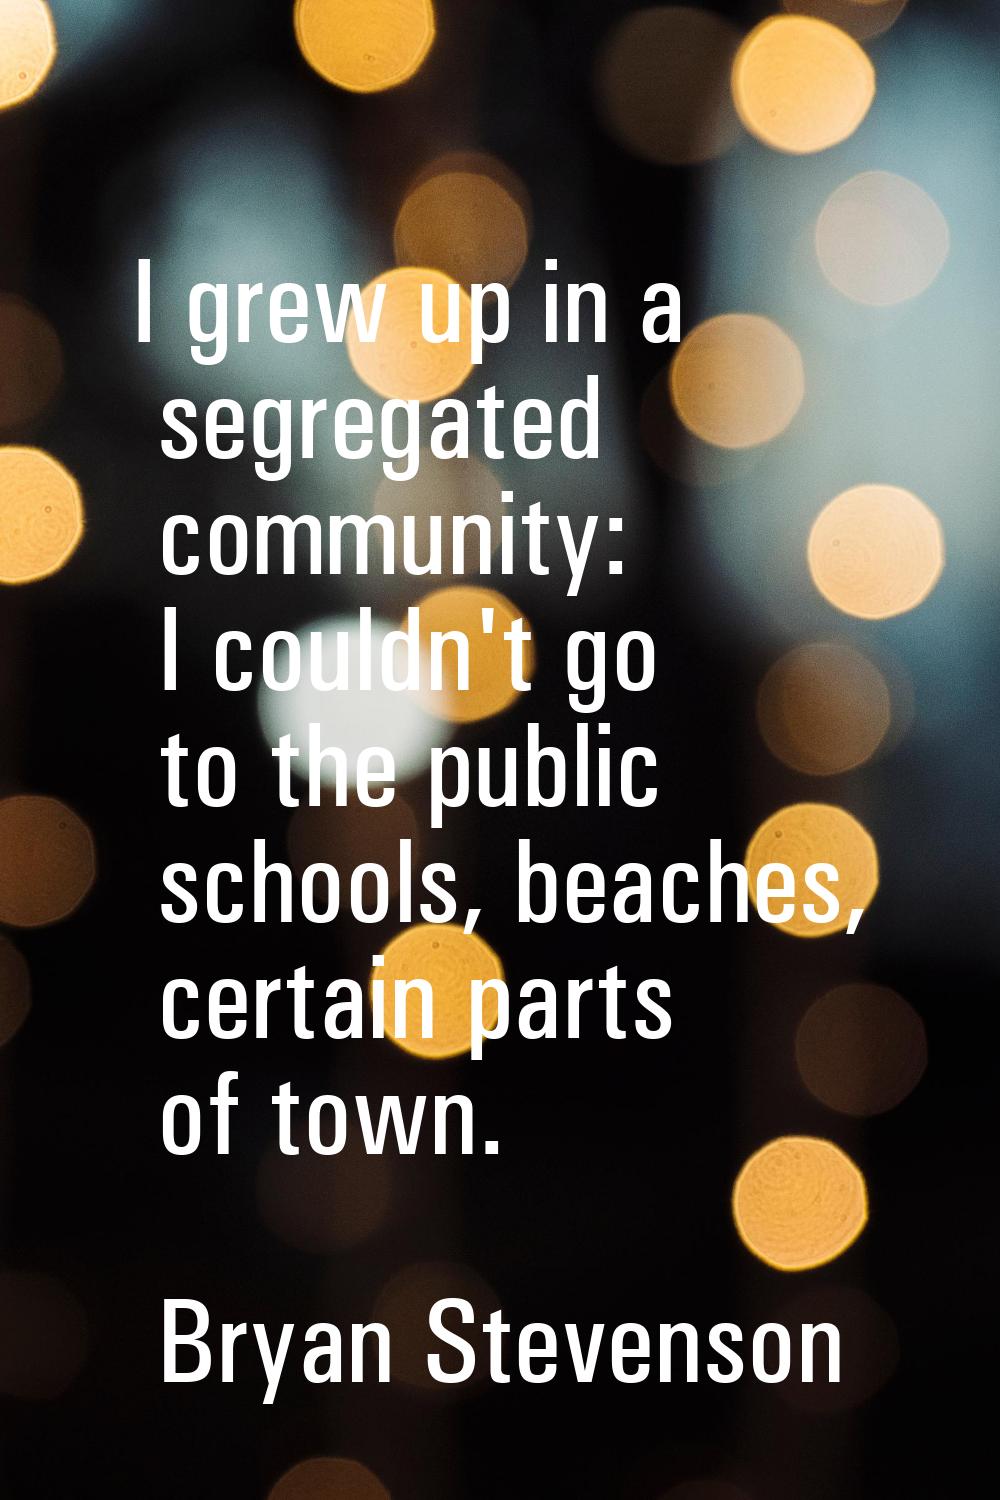 I grew up in a segregated community: I couldn't go to the public schools, beaches, certain parts of